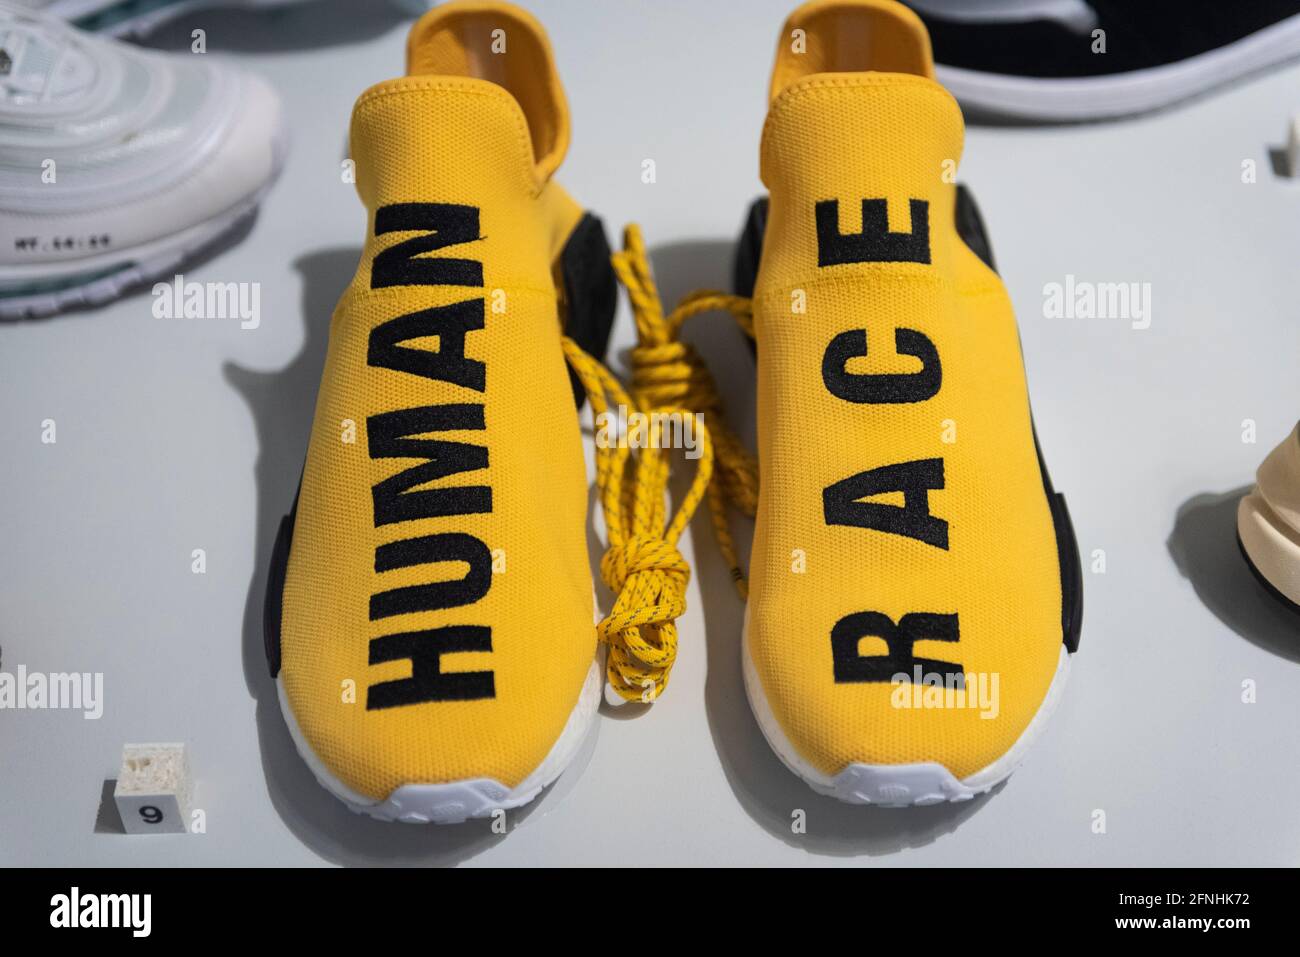 London, UK. 17 May 2021. Adidas HU Pharrell Human Race "Yellow", 2016, a collaboration between Adidas and musician Pharrell Williams. Preview of “Sneakers Unboxed: Studio to Street” at the Design